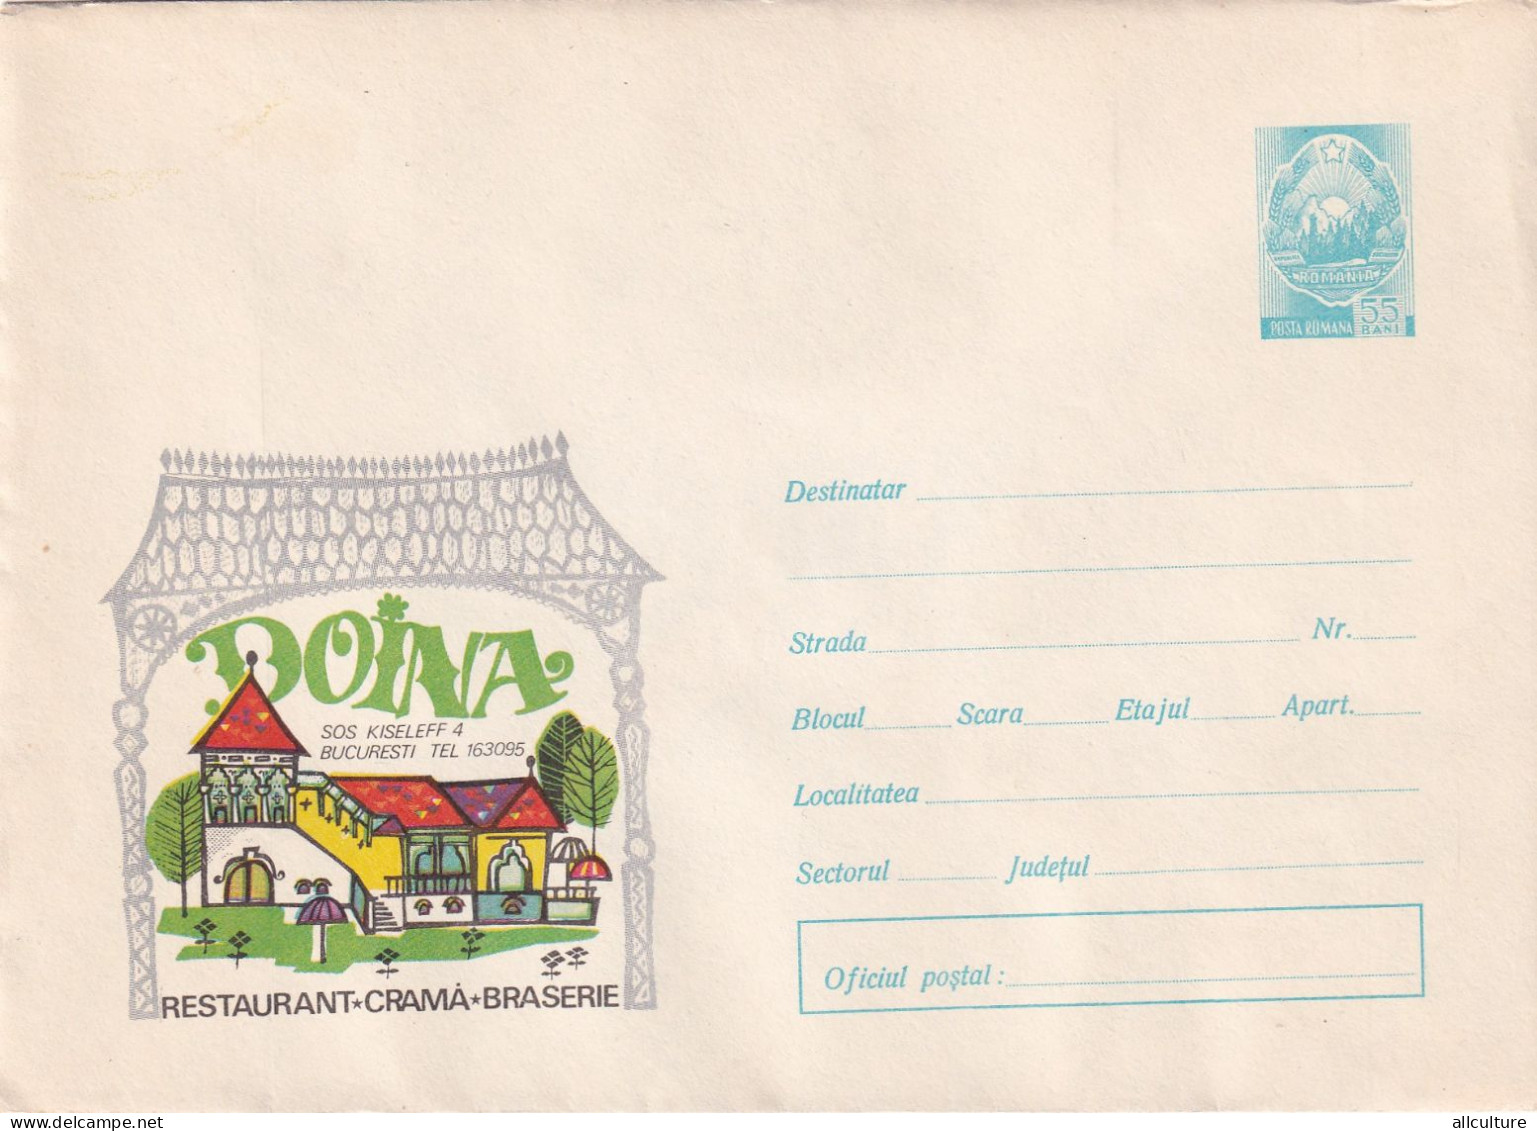 A24514 - RESTAURANT "DOINA" BEER,ALCOHOL  1970  COVER STATIONERY  Romania UNUSED - Postal Stationery